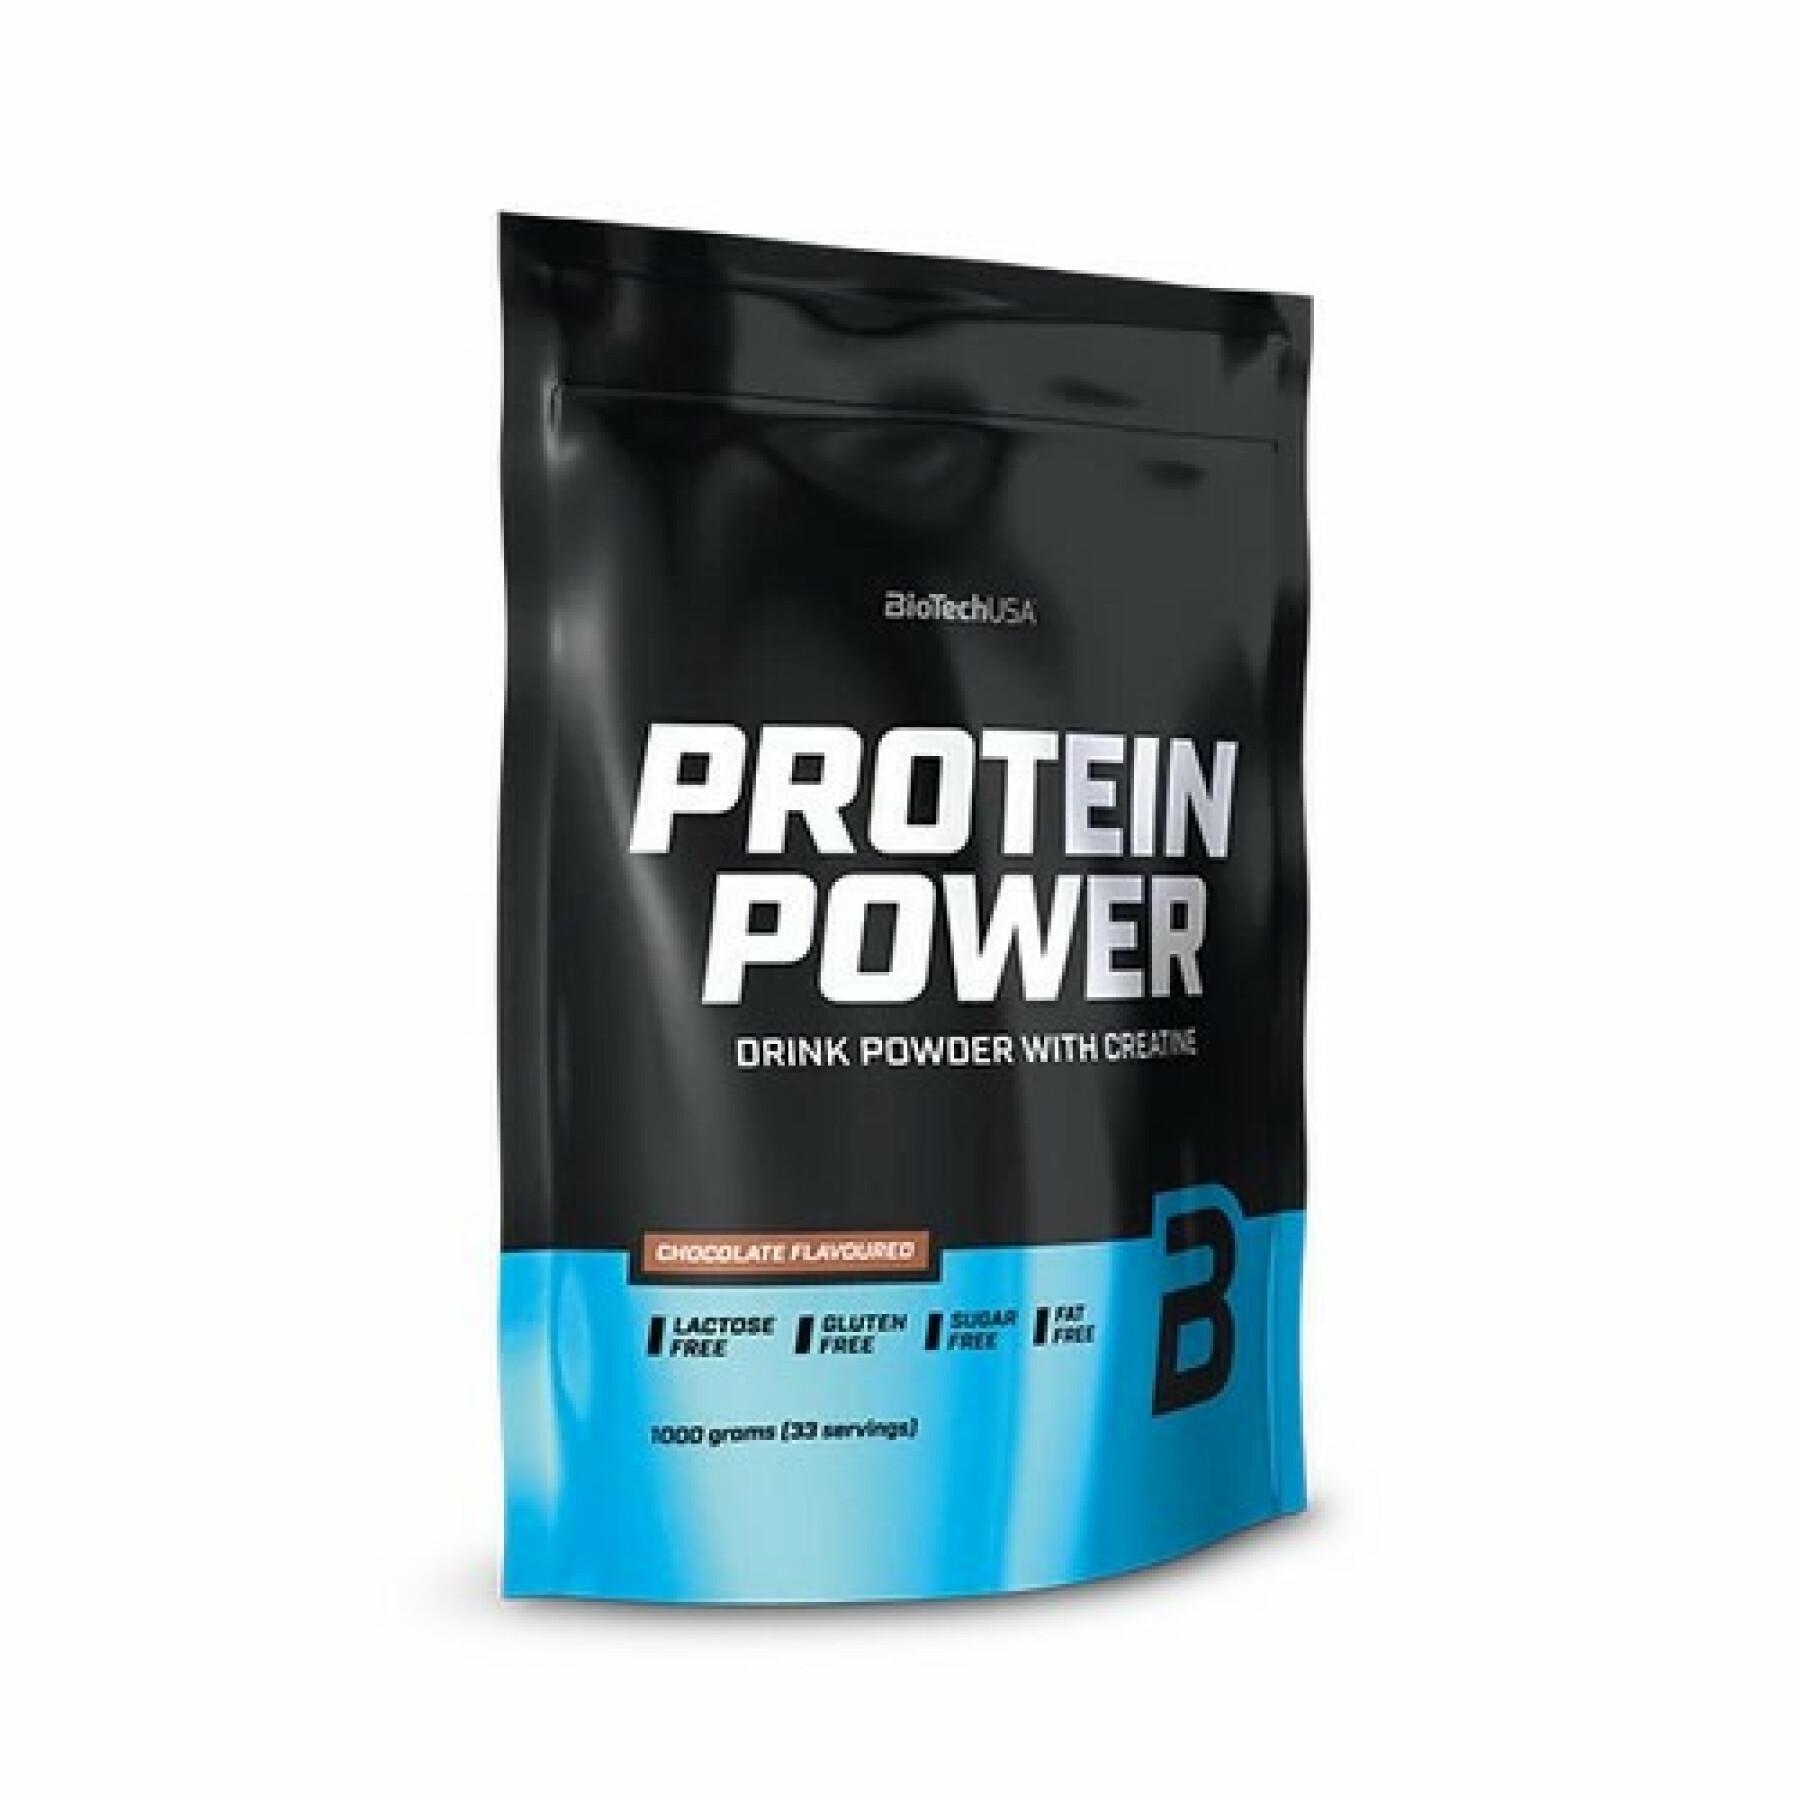 Pack of 10 bags of protein Biotech USA power - Chocolate - 1kg